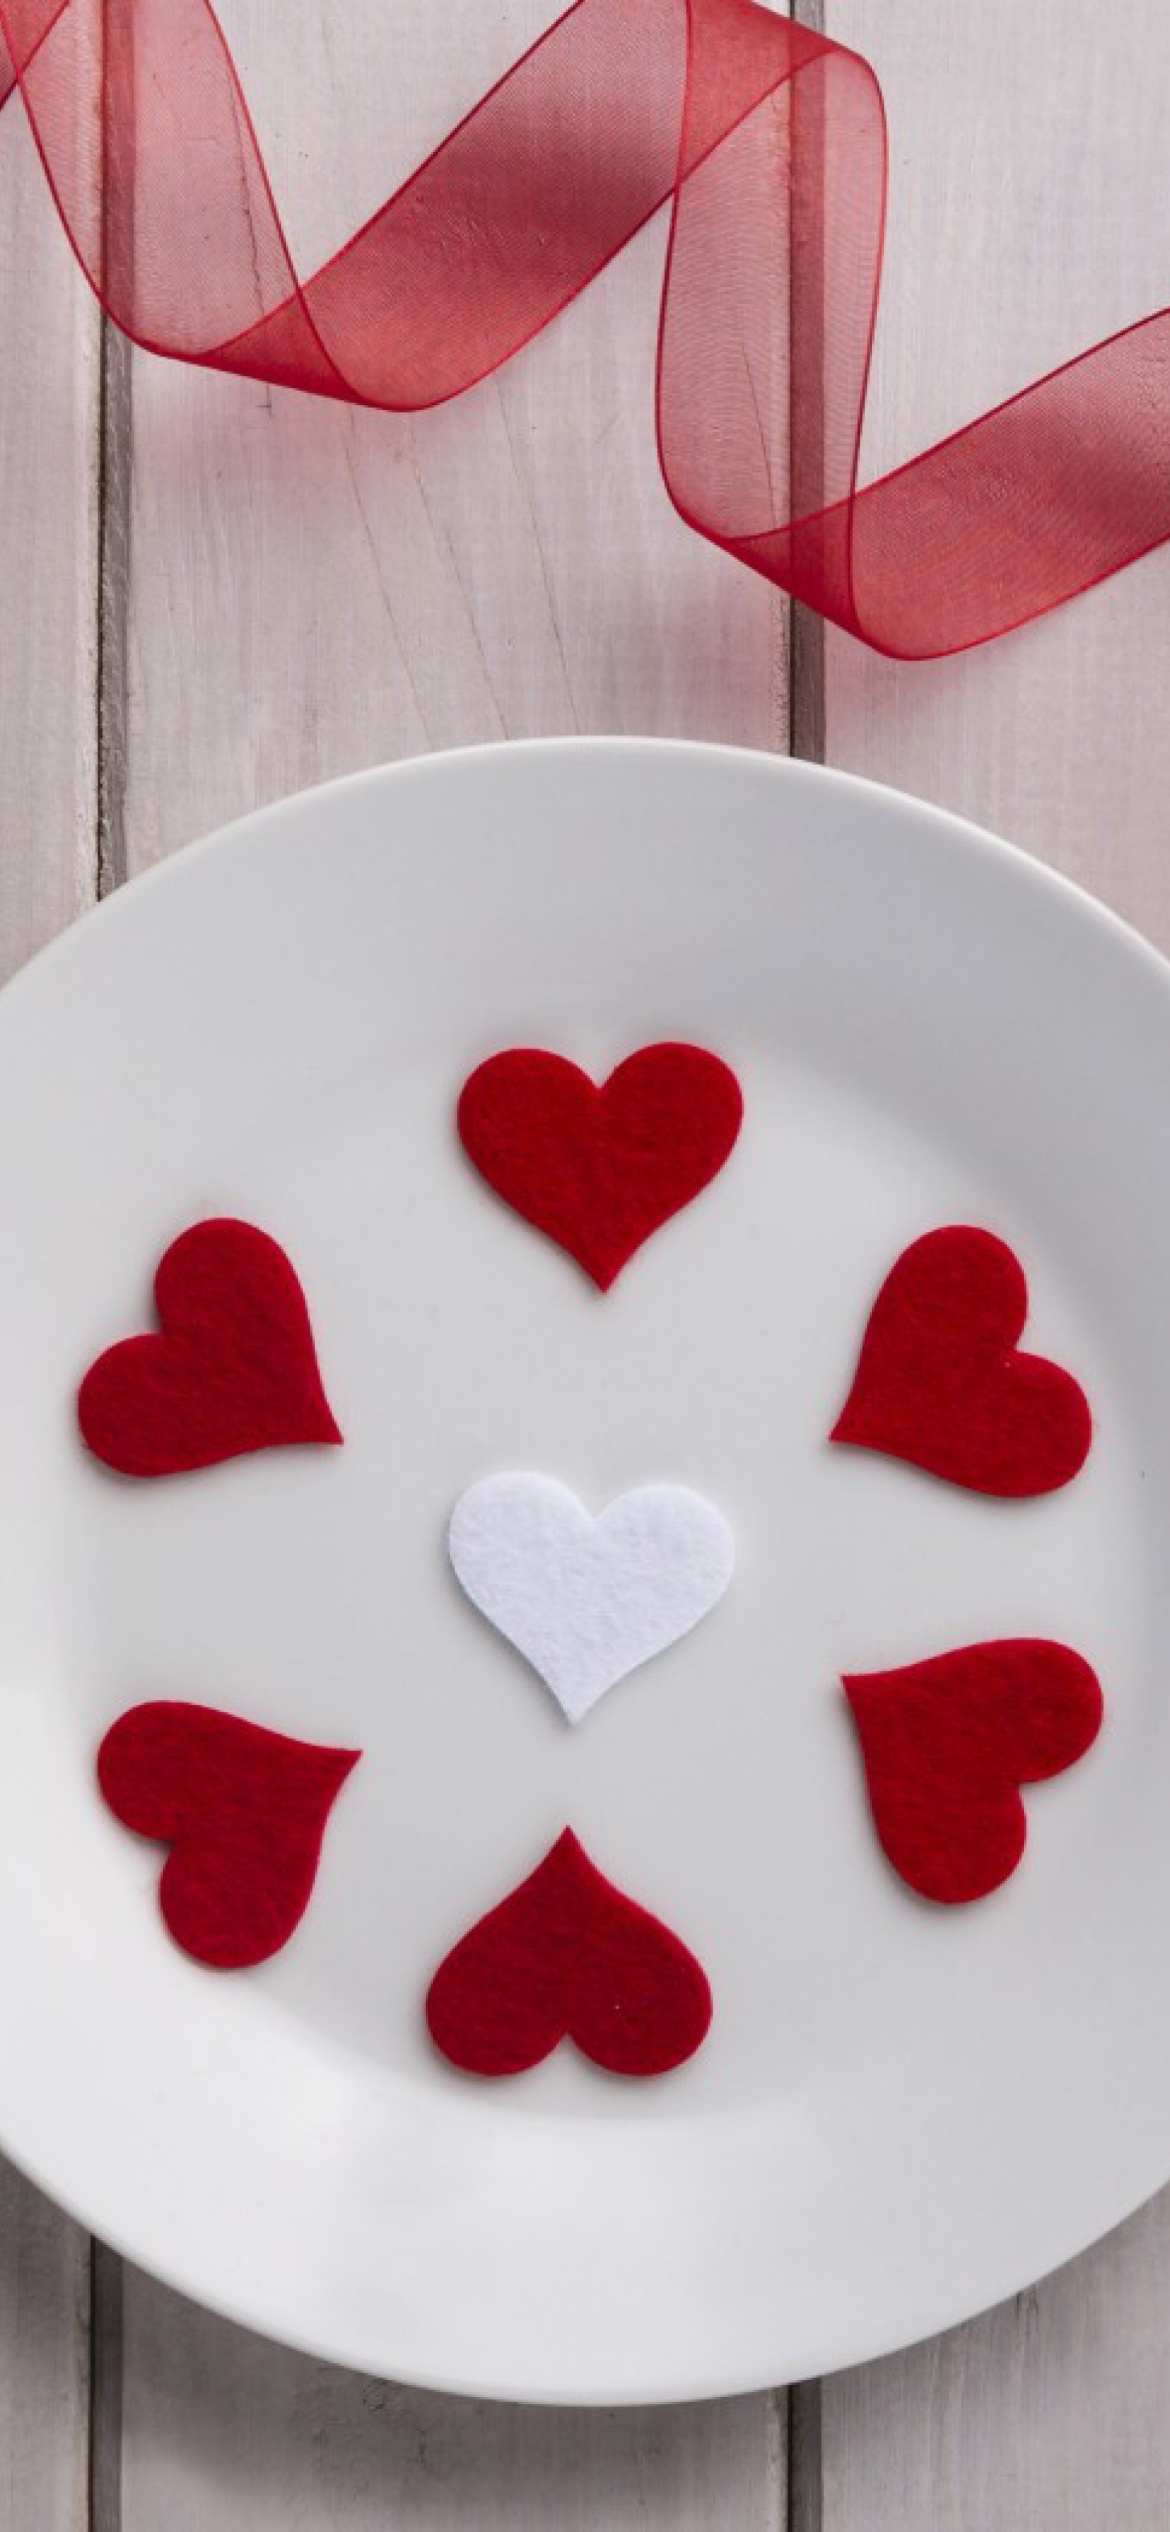 Romantic Valentines Day Table Settings wallpaper 1170x2532